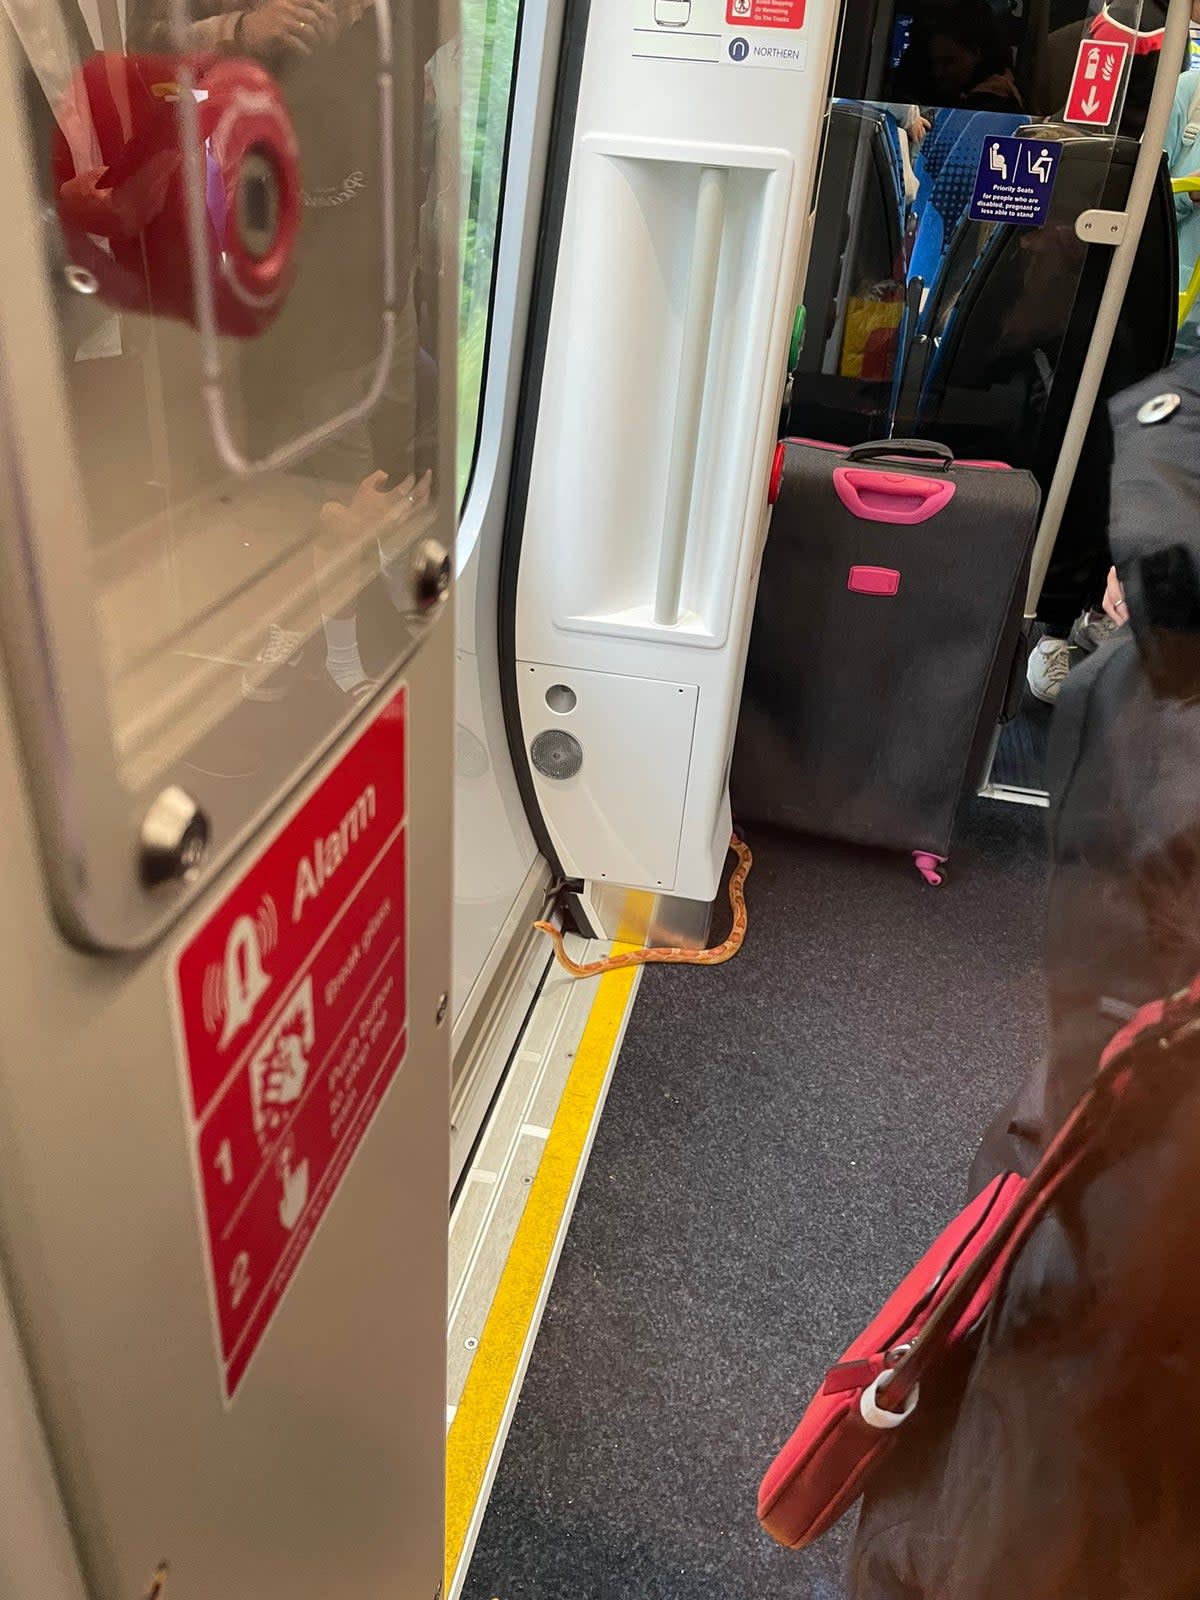 The snake was pictured by the train carriage door as if it was trying to escape (Sophie Johnstone/Twitter)